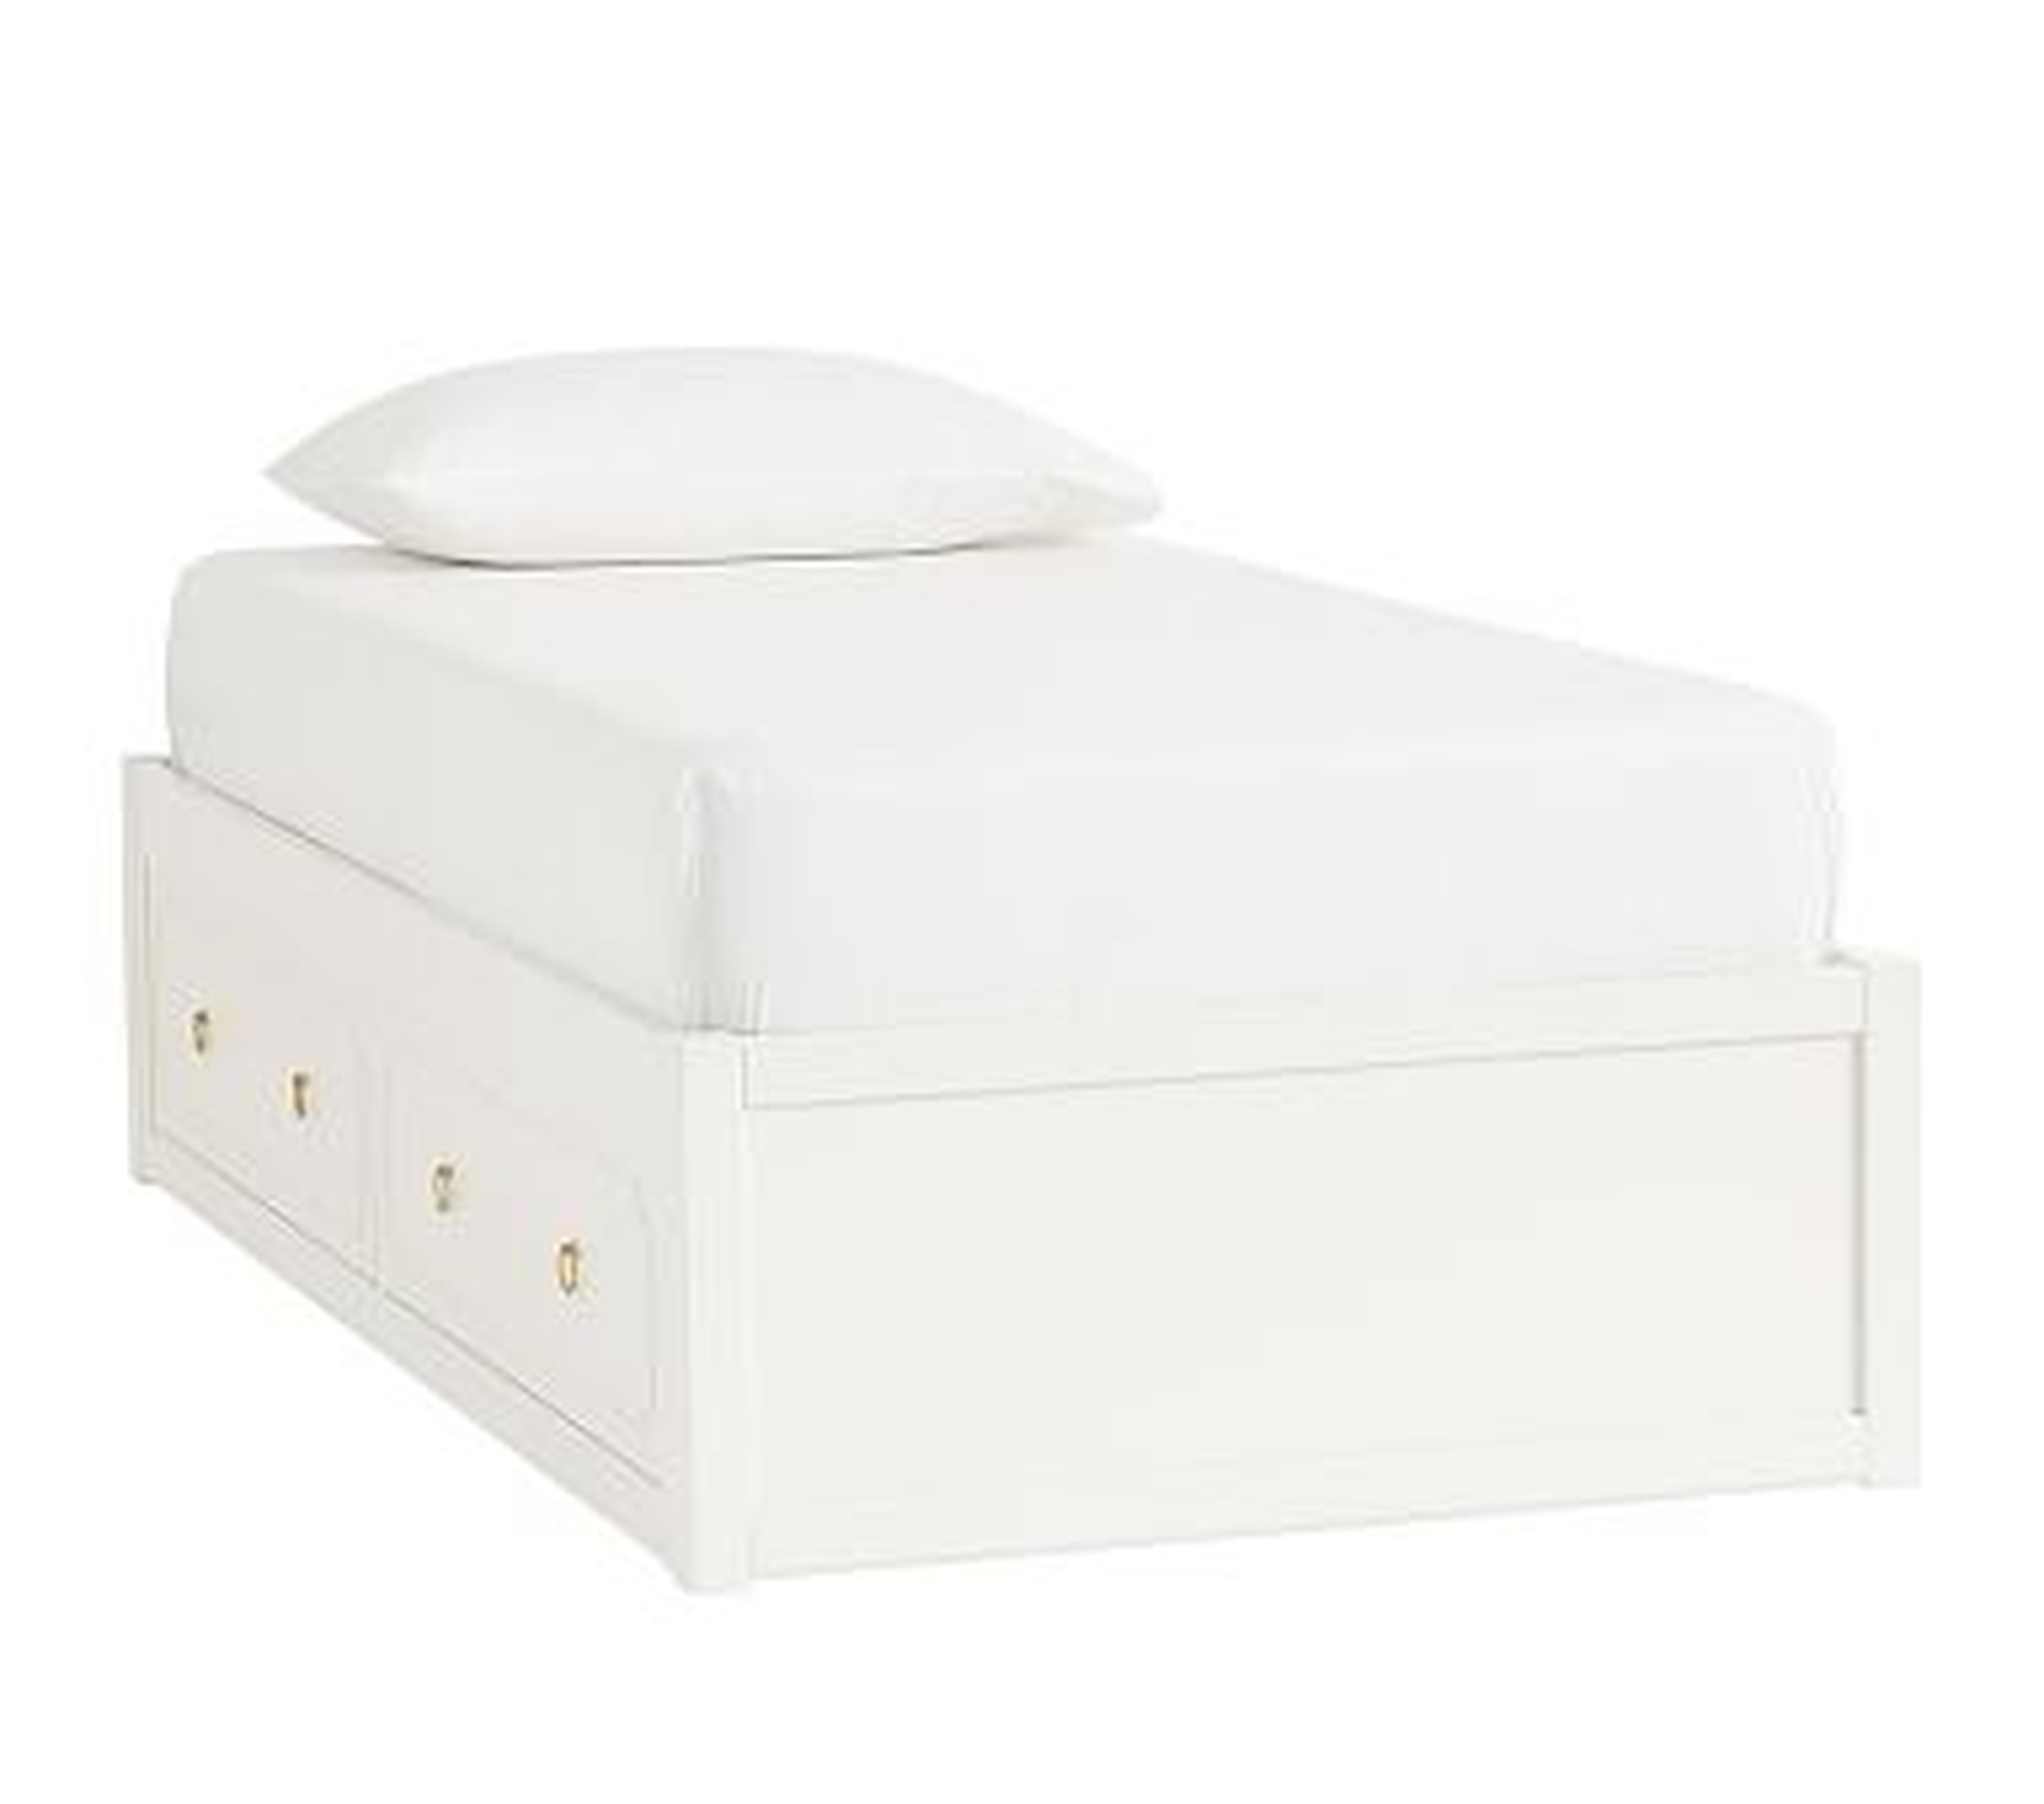 Ava Regency Platform Bed, Simply White, Unlimited Flat Rate Delivery - Pottery Barn Kids